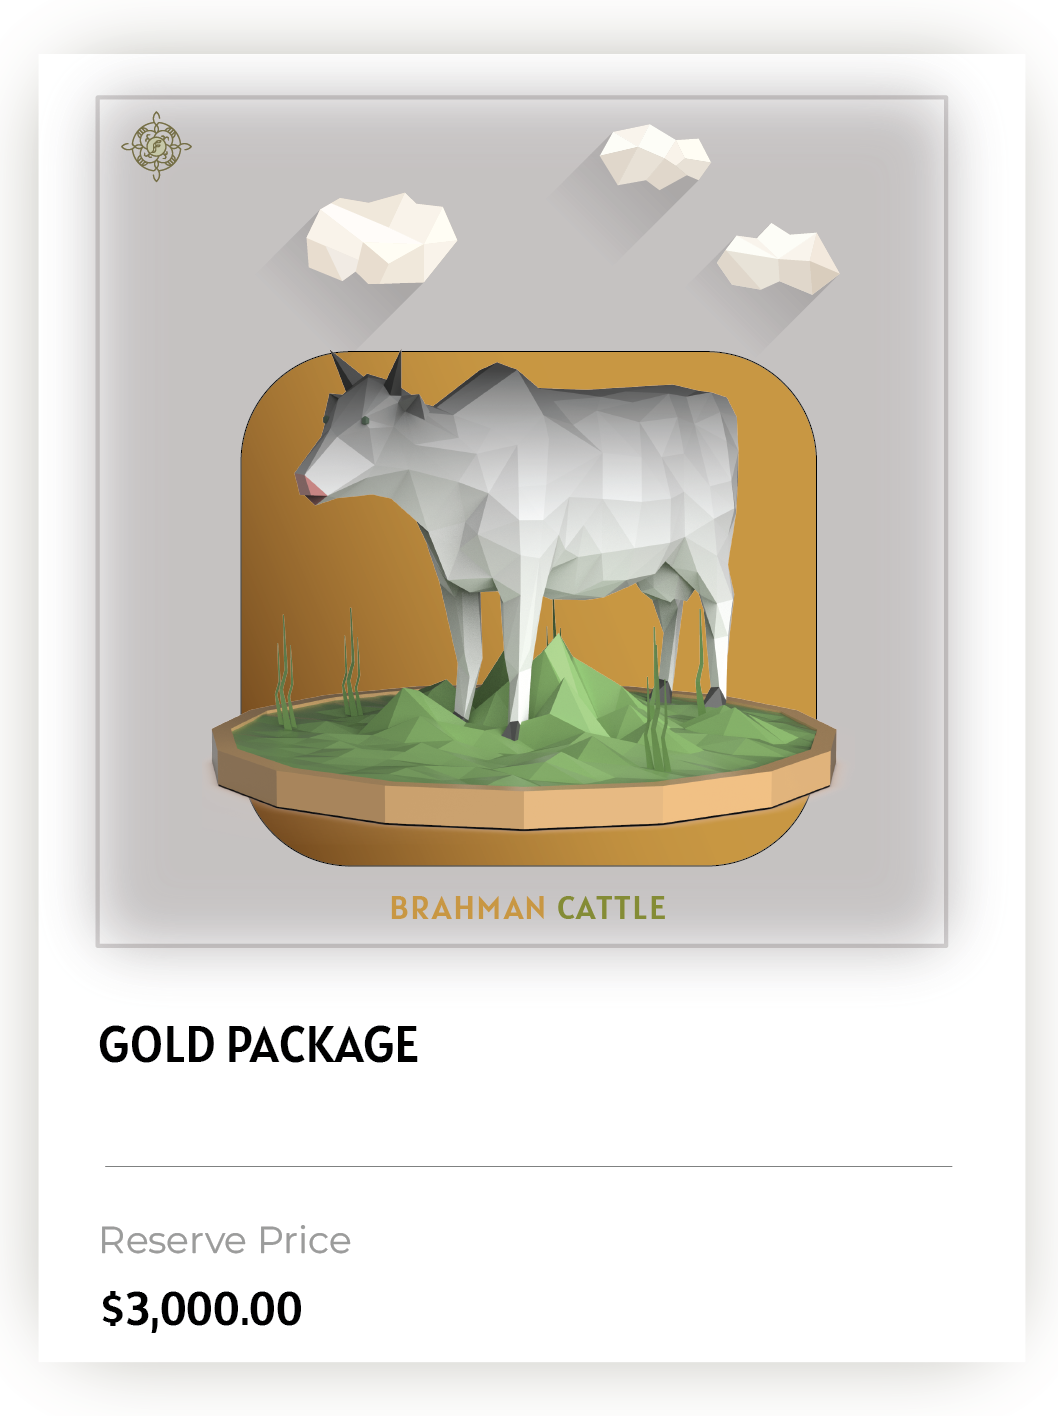 GOLD PACKAGE